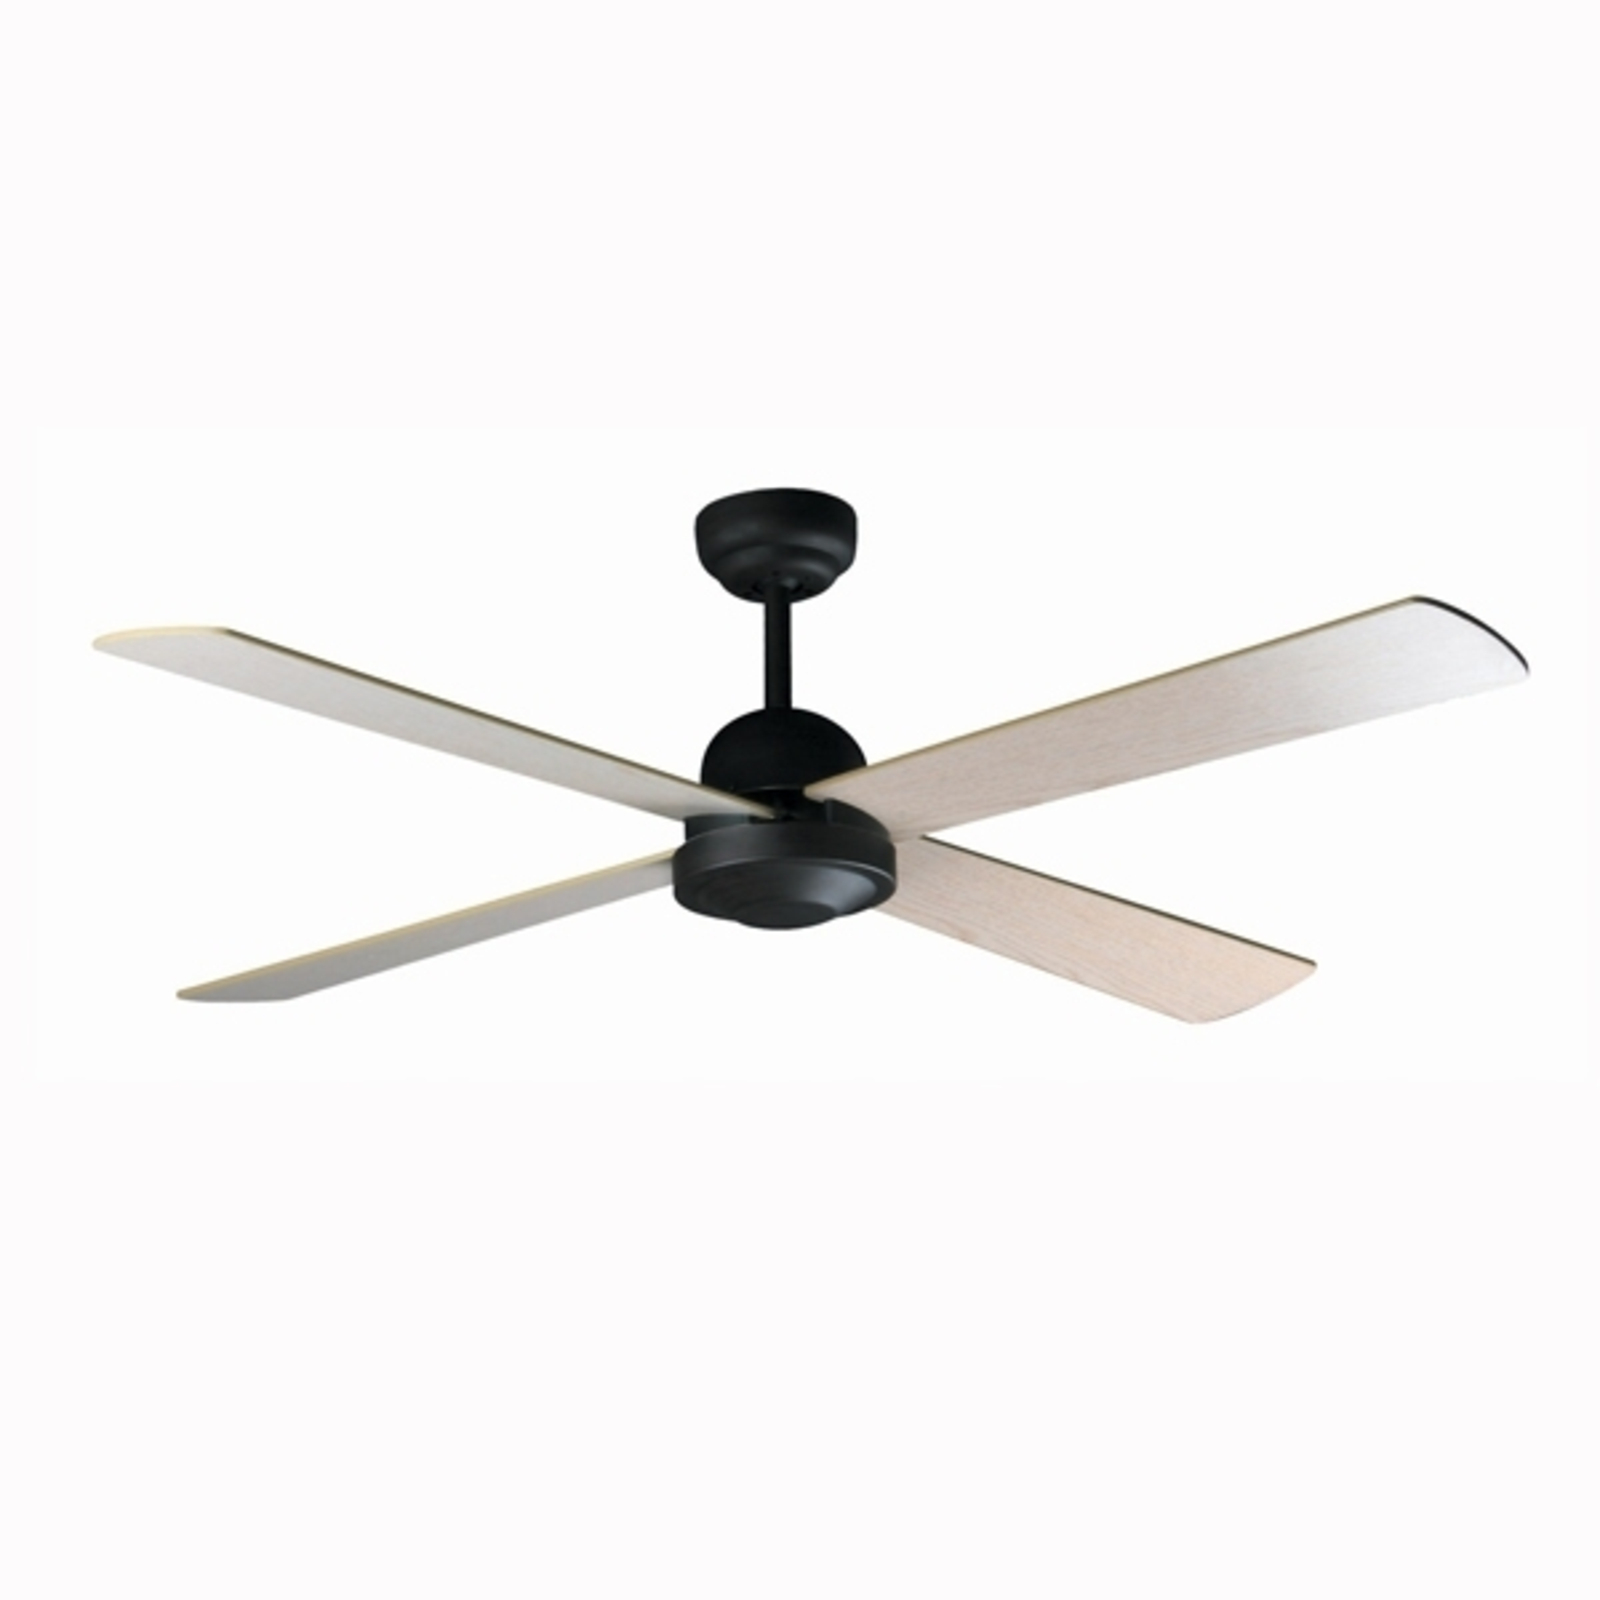 IBIZA brown ceiling fan with remote control